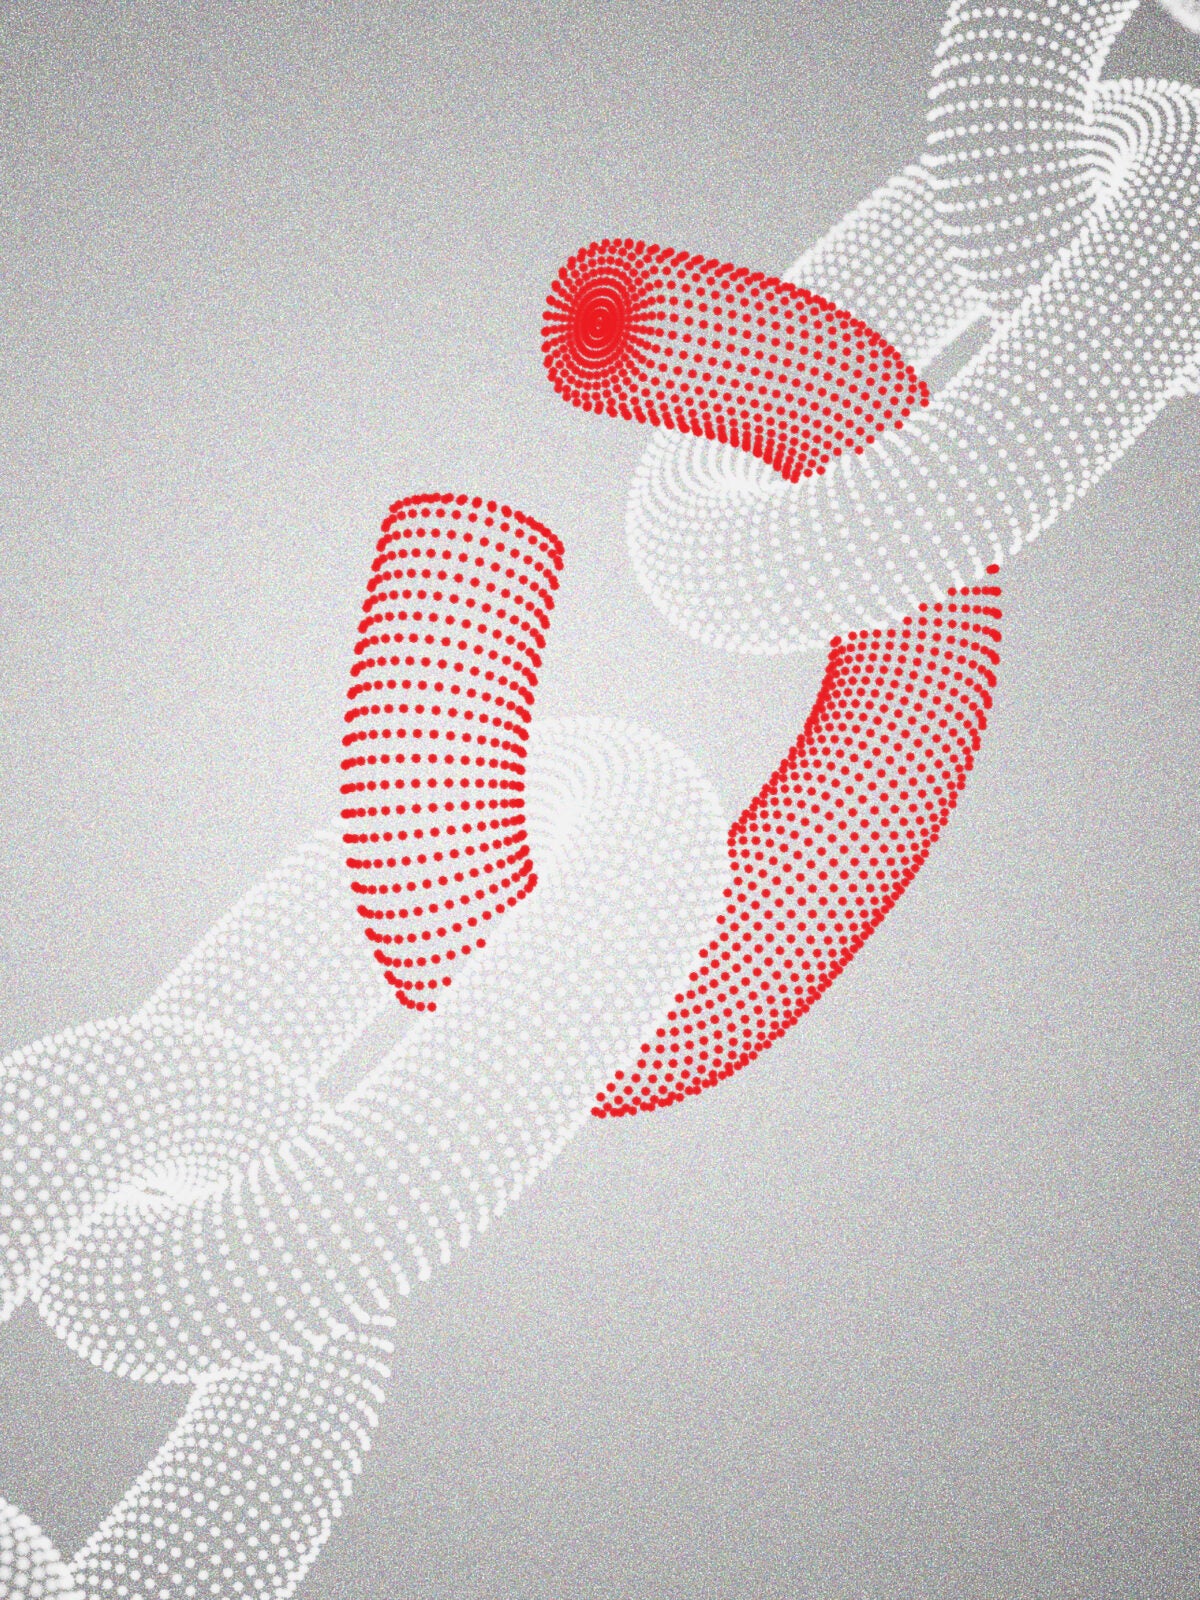 Digital illustration: a metal chain link is constructed of fine light grey dots. The link in the middle is broken and is constructed of fine bright red dots. The composition is on a light grey fuzzy background.